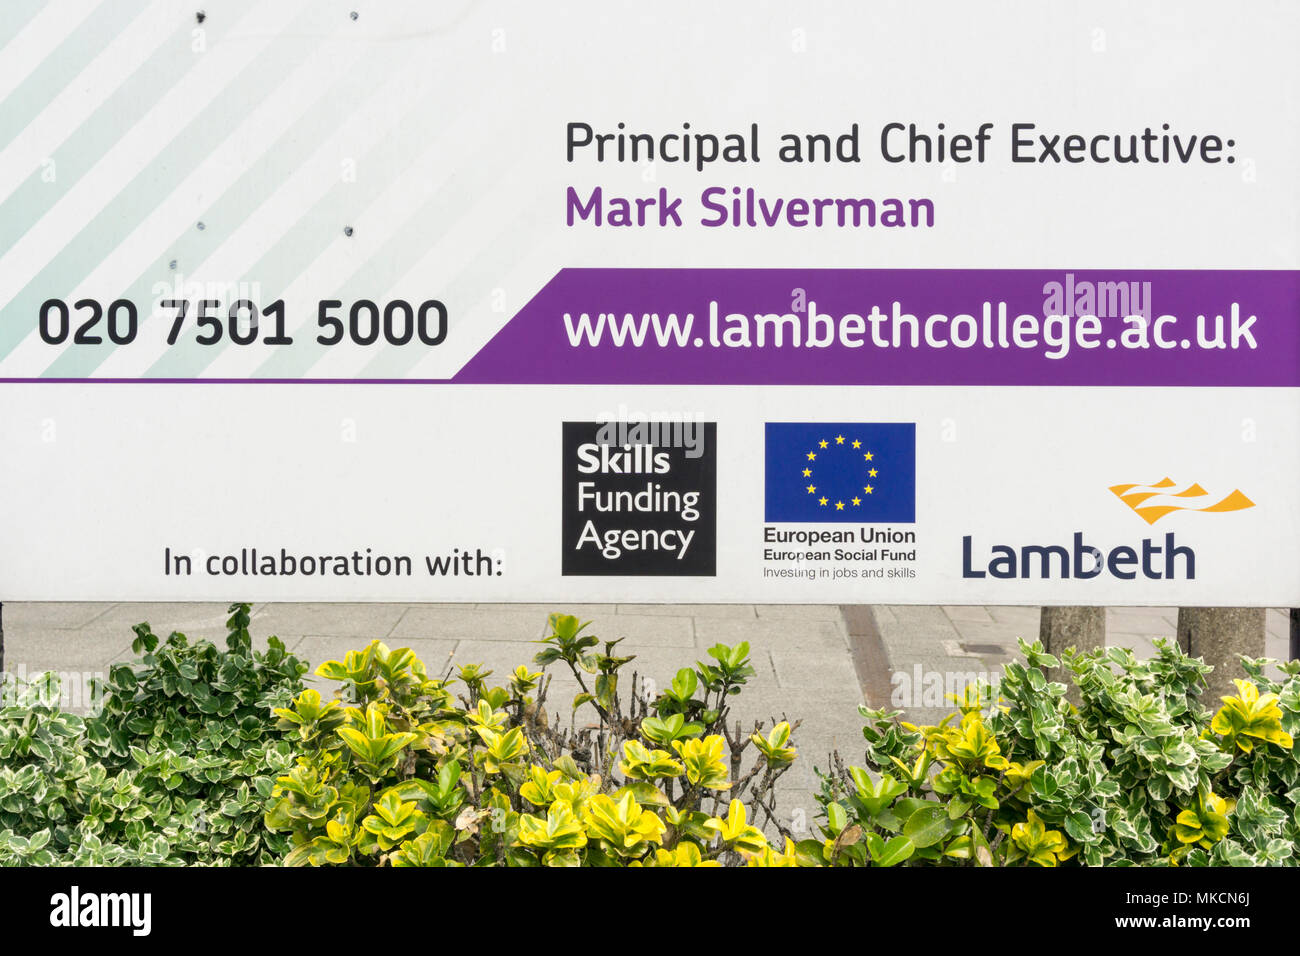 European Social Fund symbol on sign for Lambeth College recognises EU investment. Stock Photo